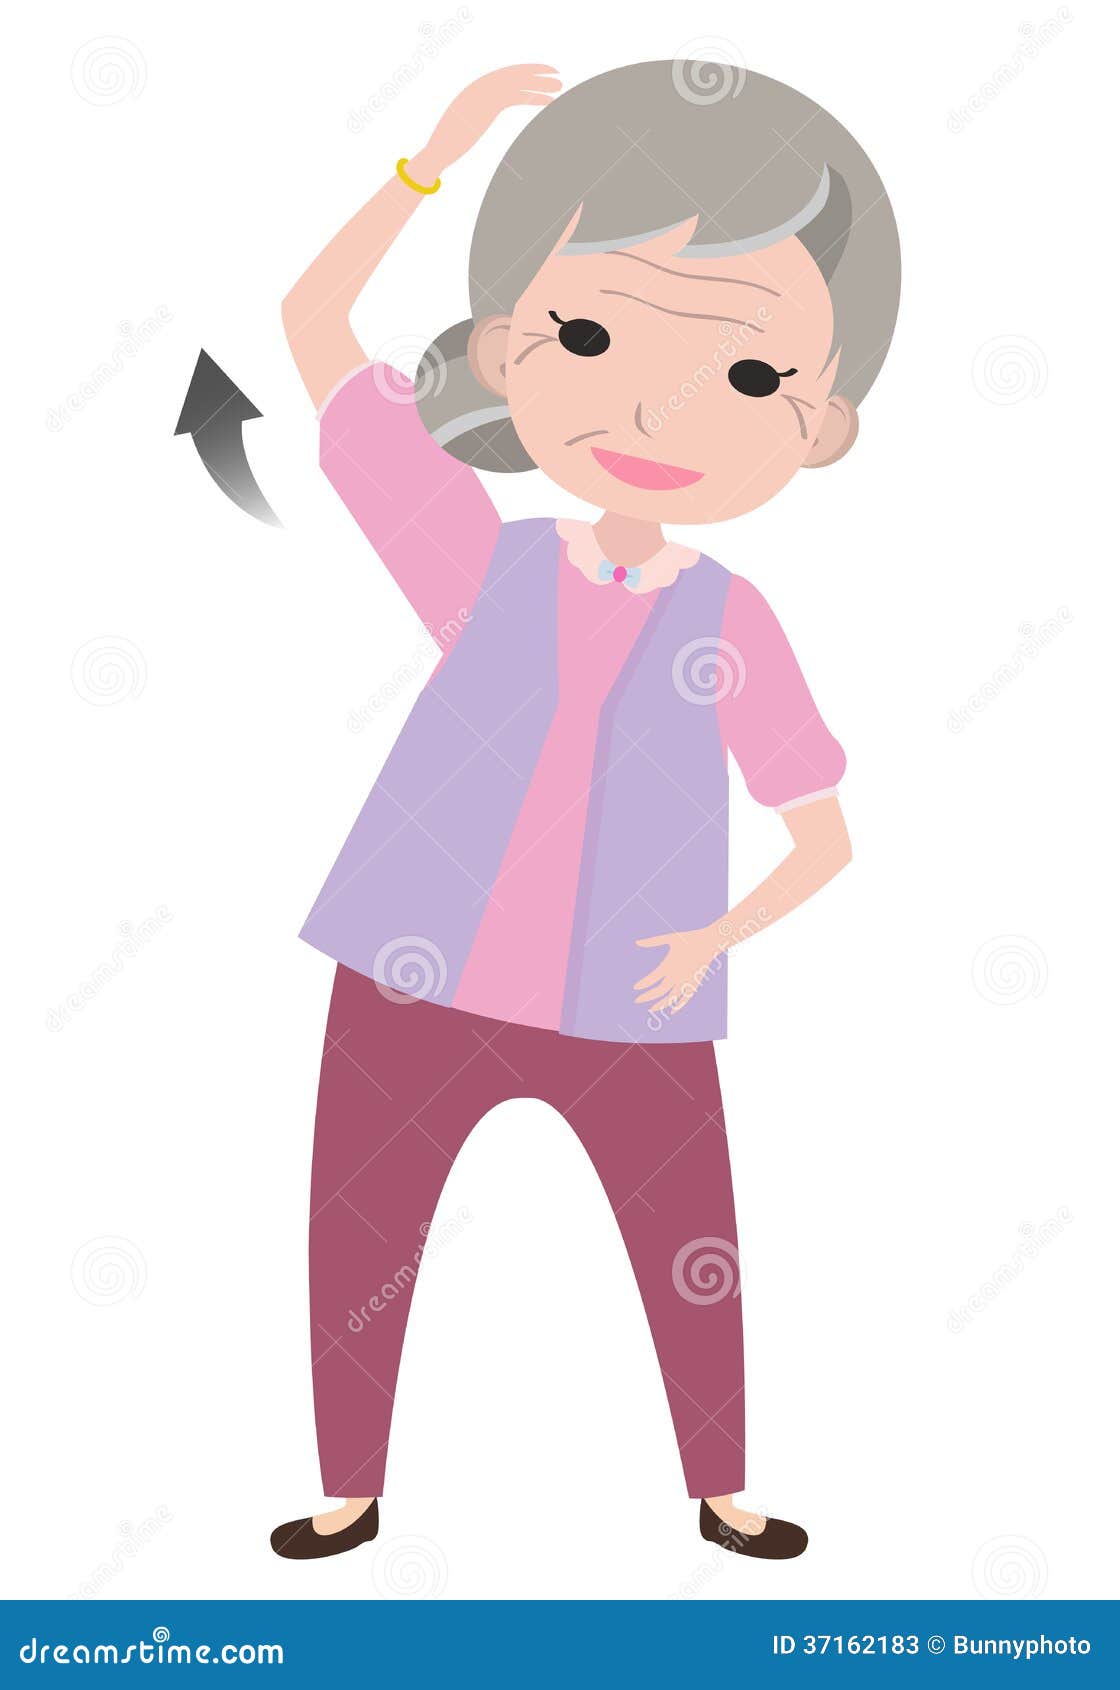 Old Woman Character Exercise Stock Vector - Illustration ...